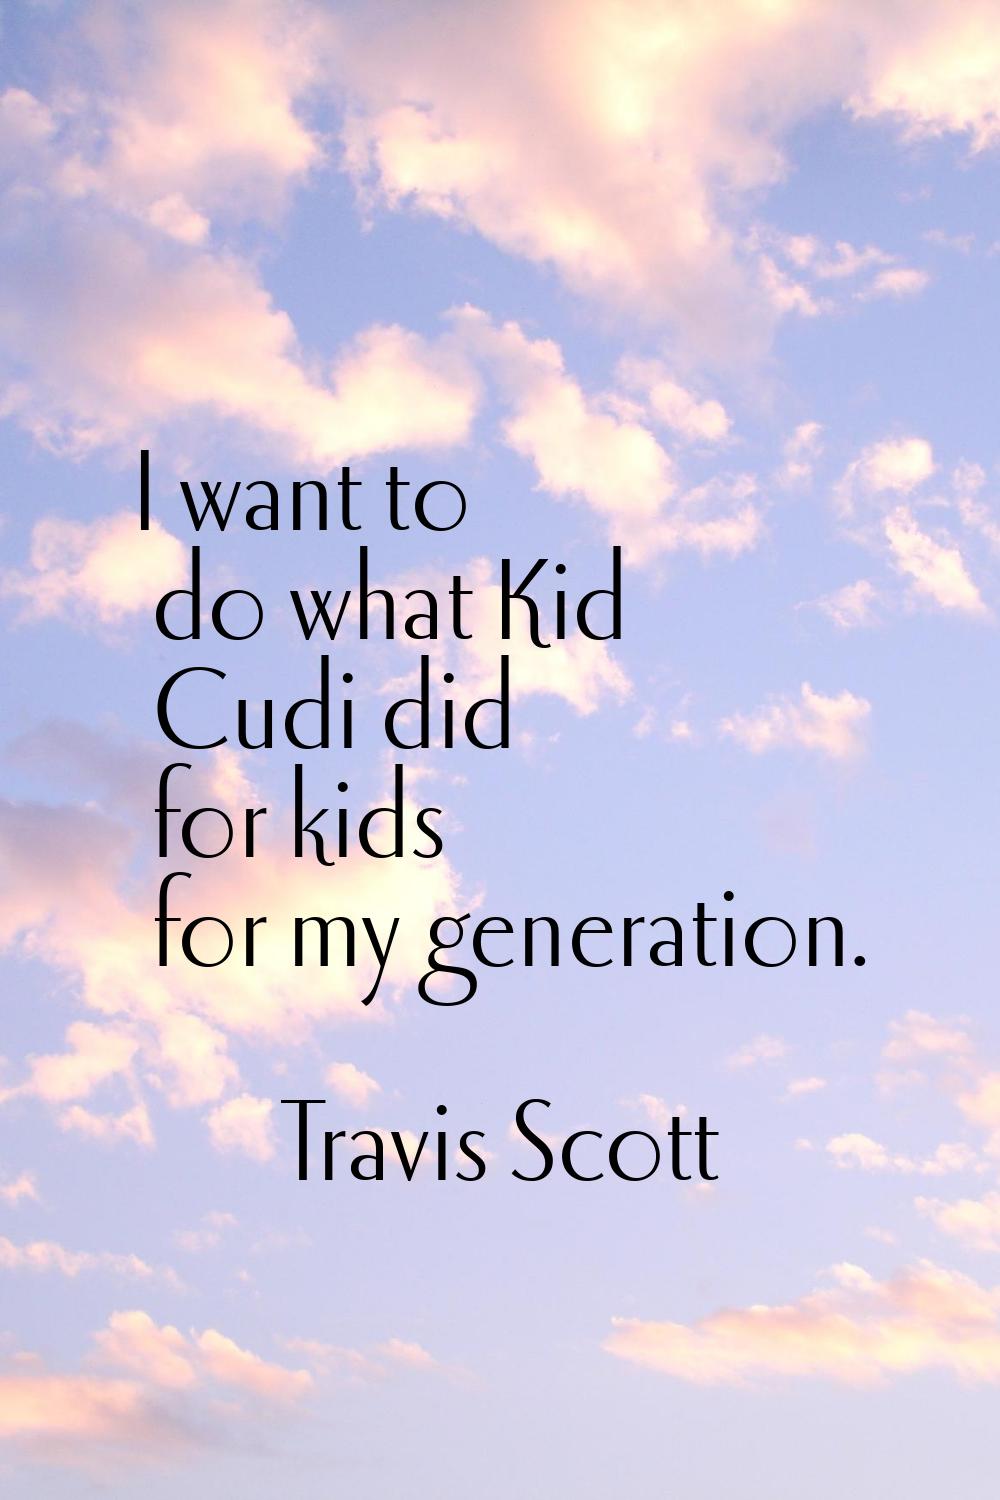 I want to do what Kid Cudi did for kids for my generation.